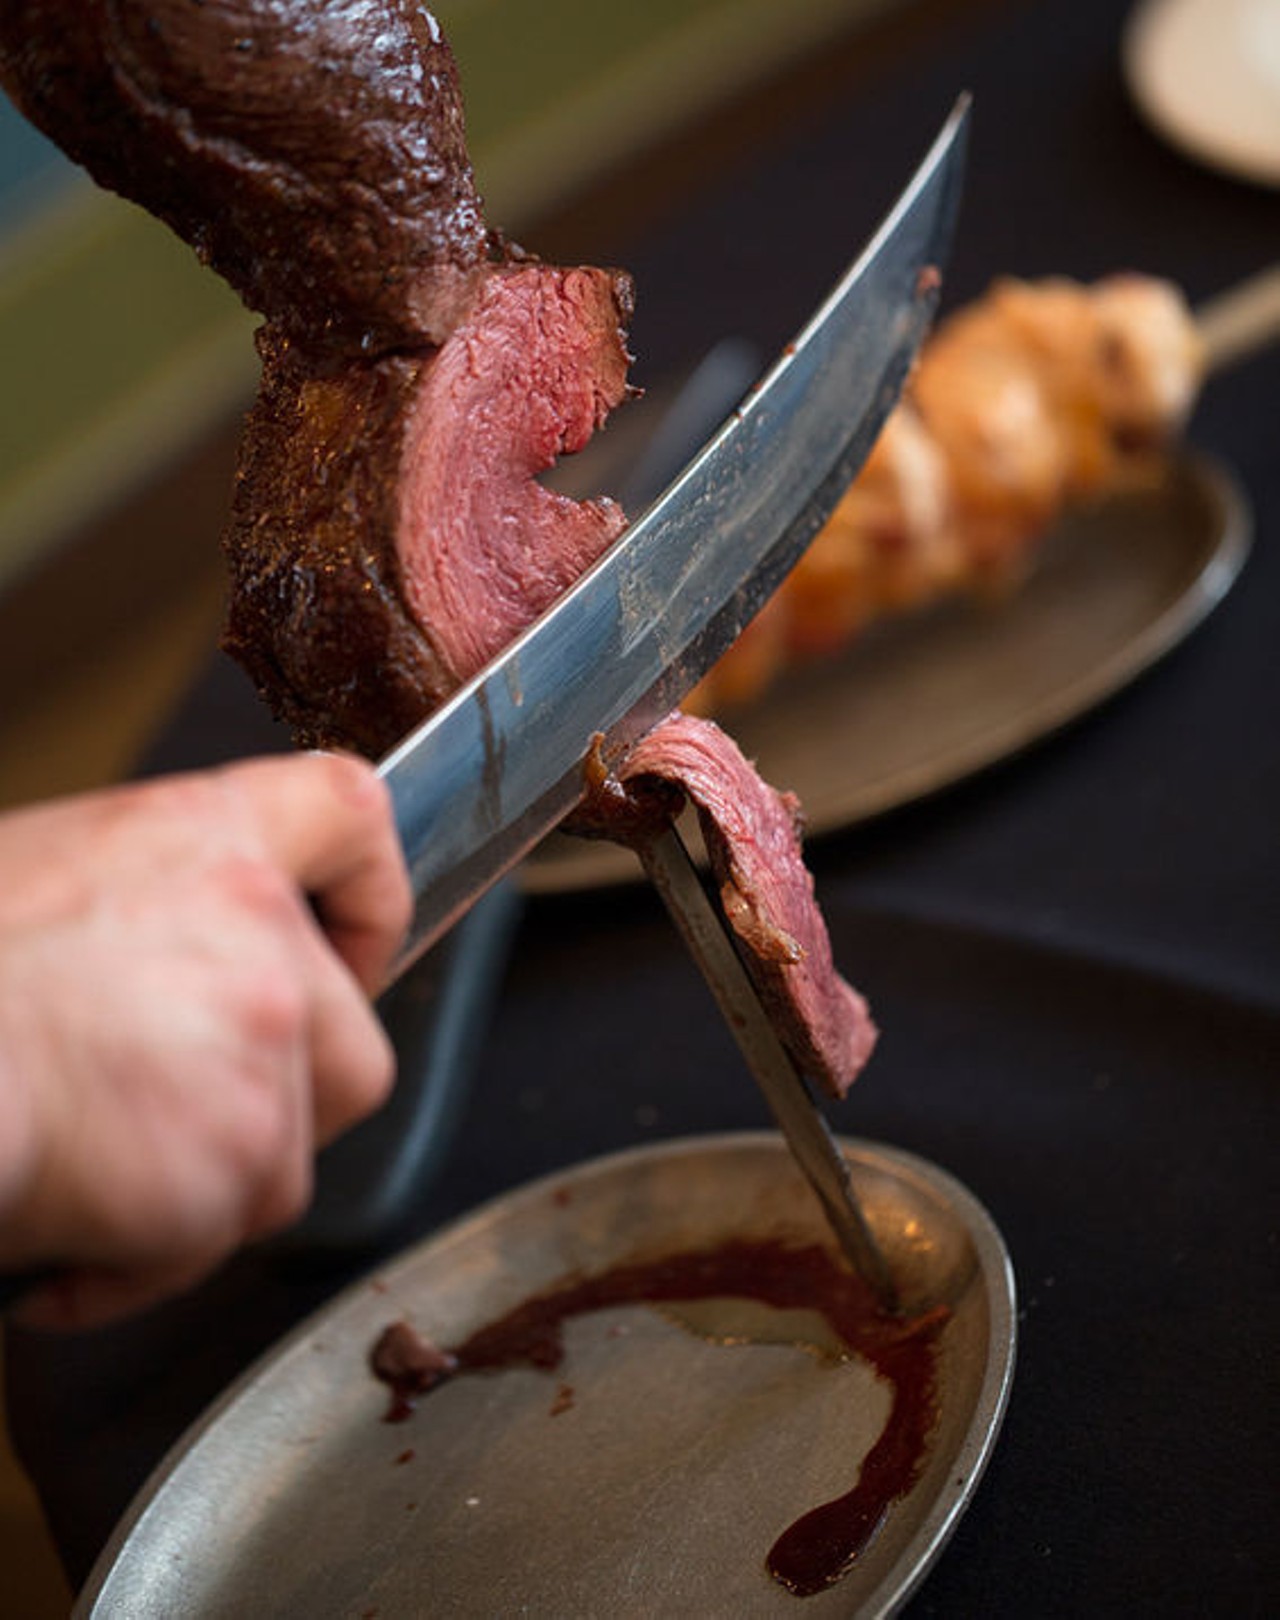 Cutting the Skewer of Picanha, the house sirloin. See more photos: Inside Brazikat Brazilian Steak & Seafood House.